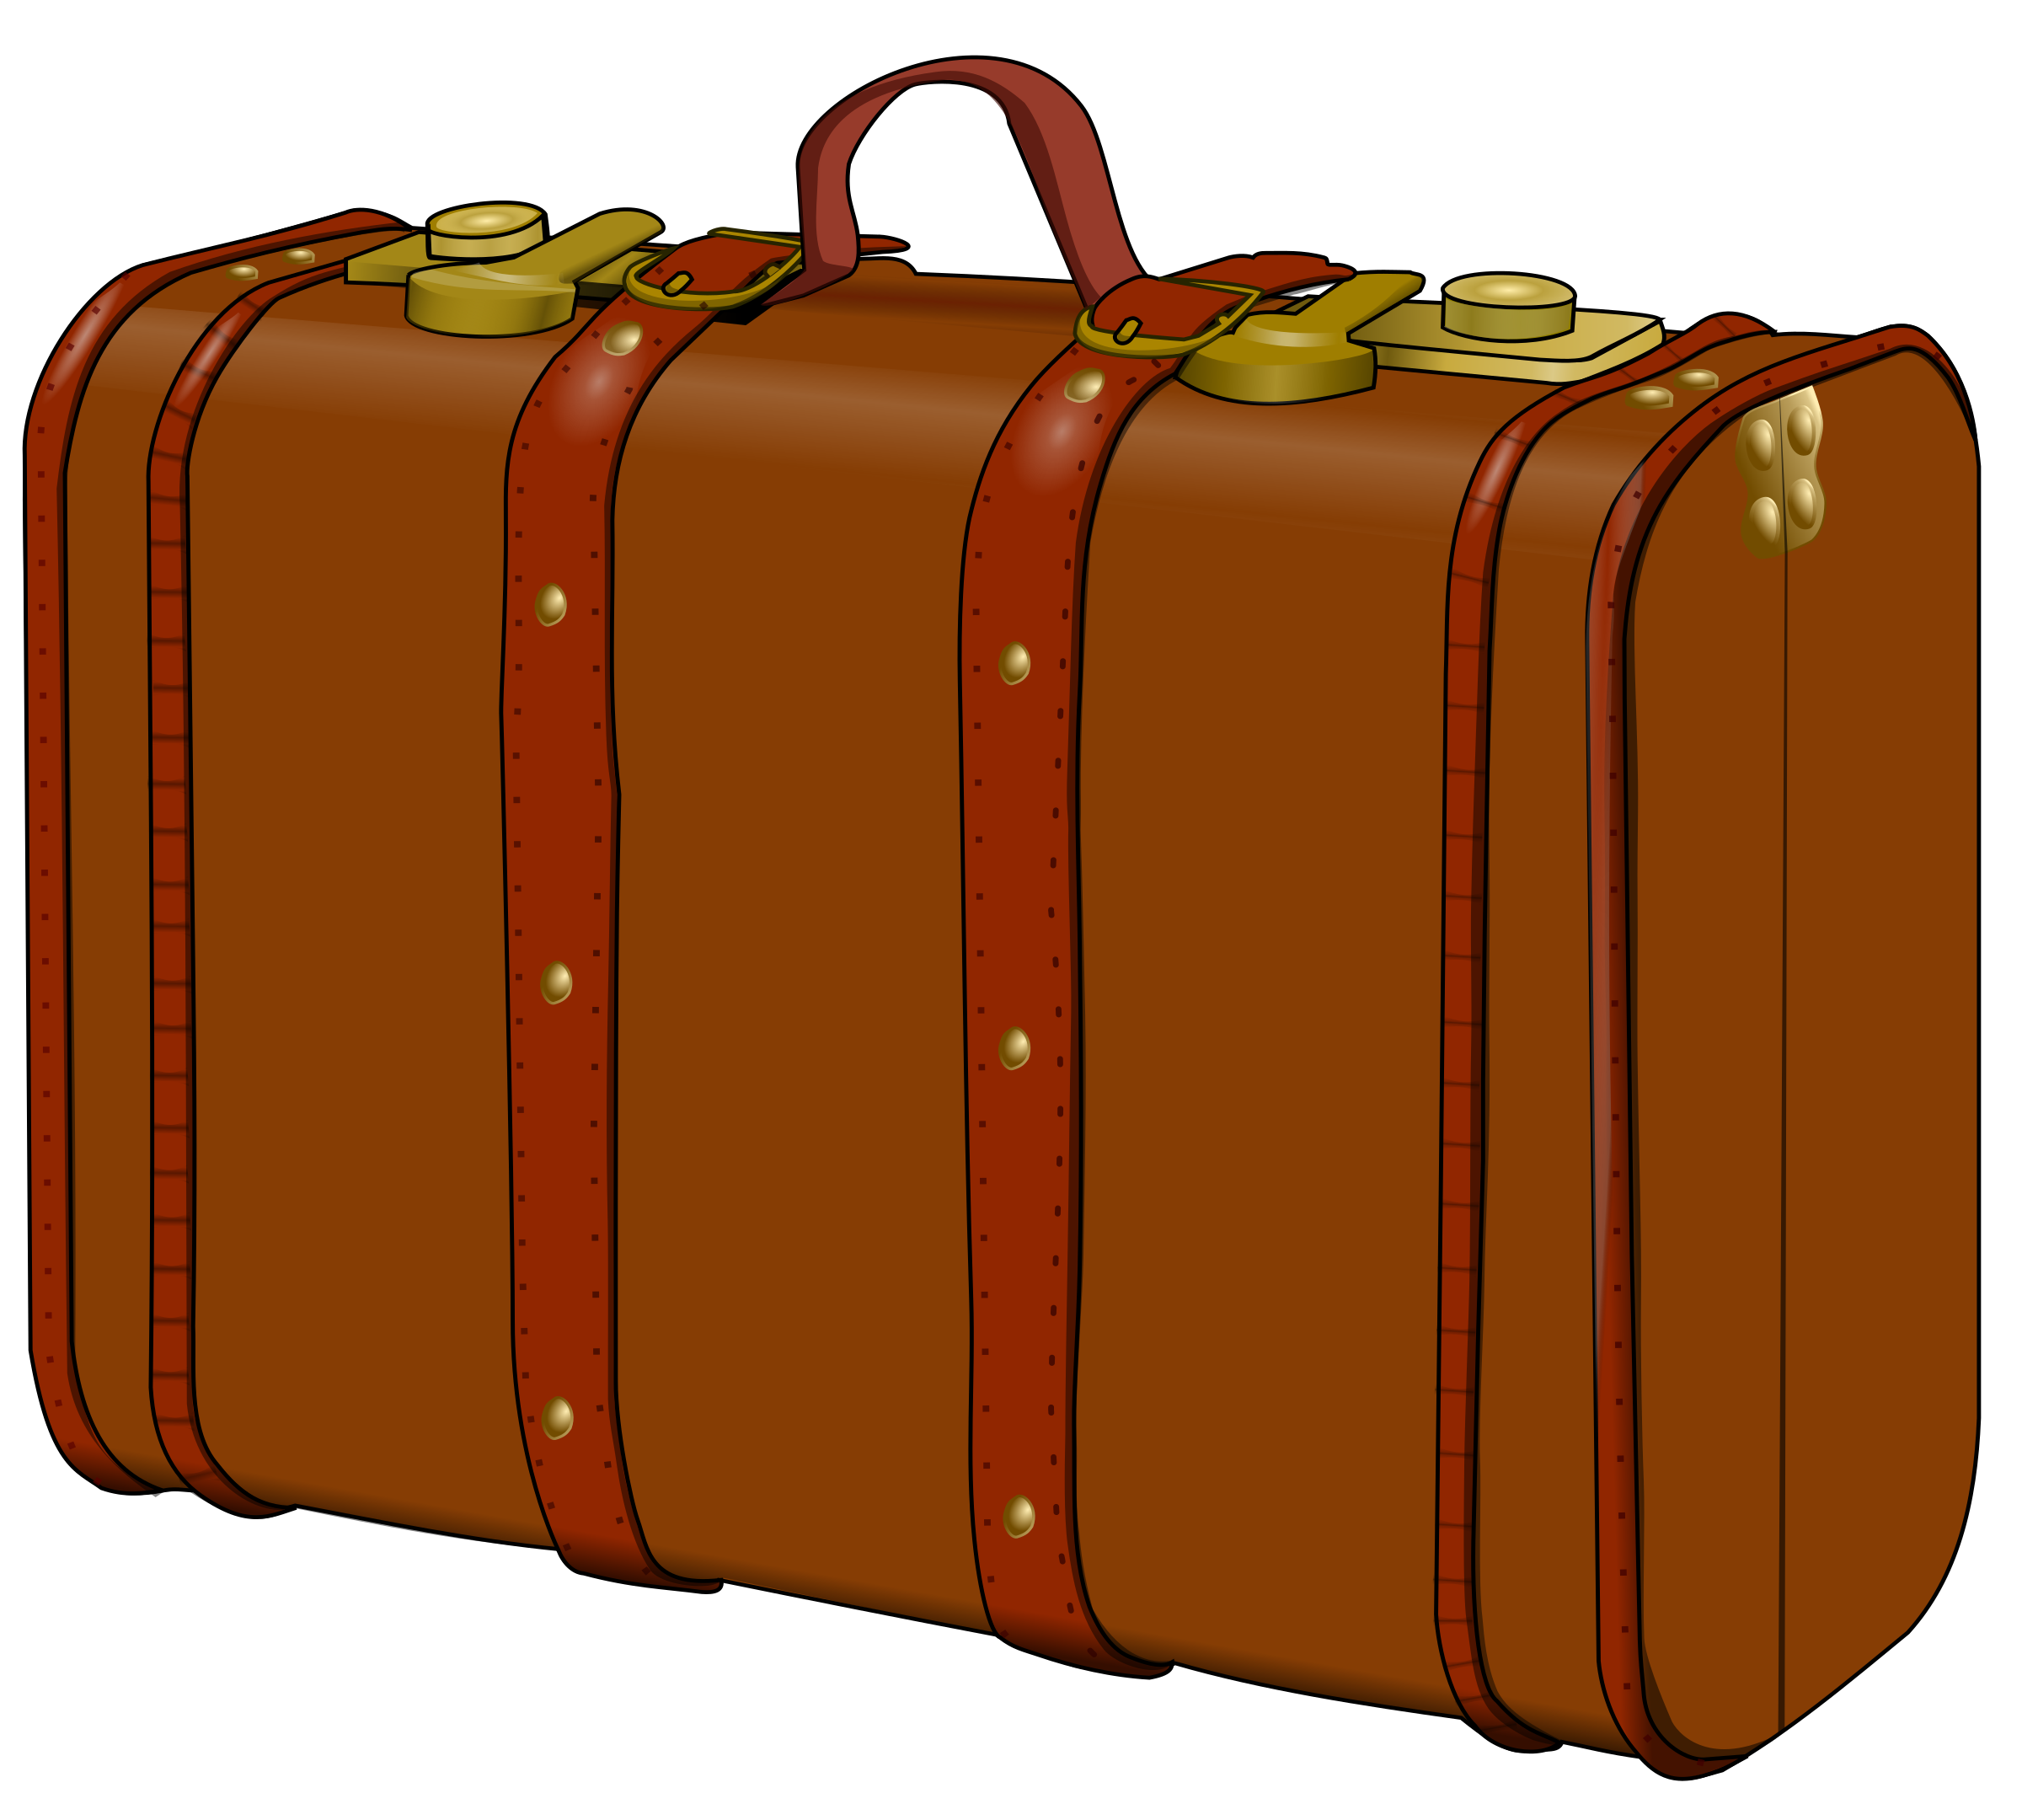 Luggage clipart old fashioned, Luggage old fashioned